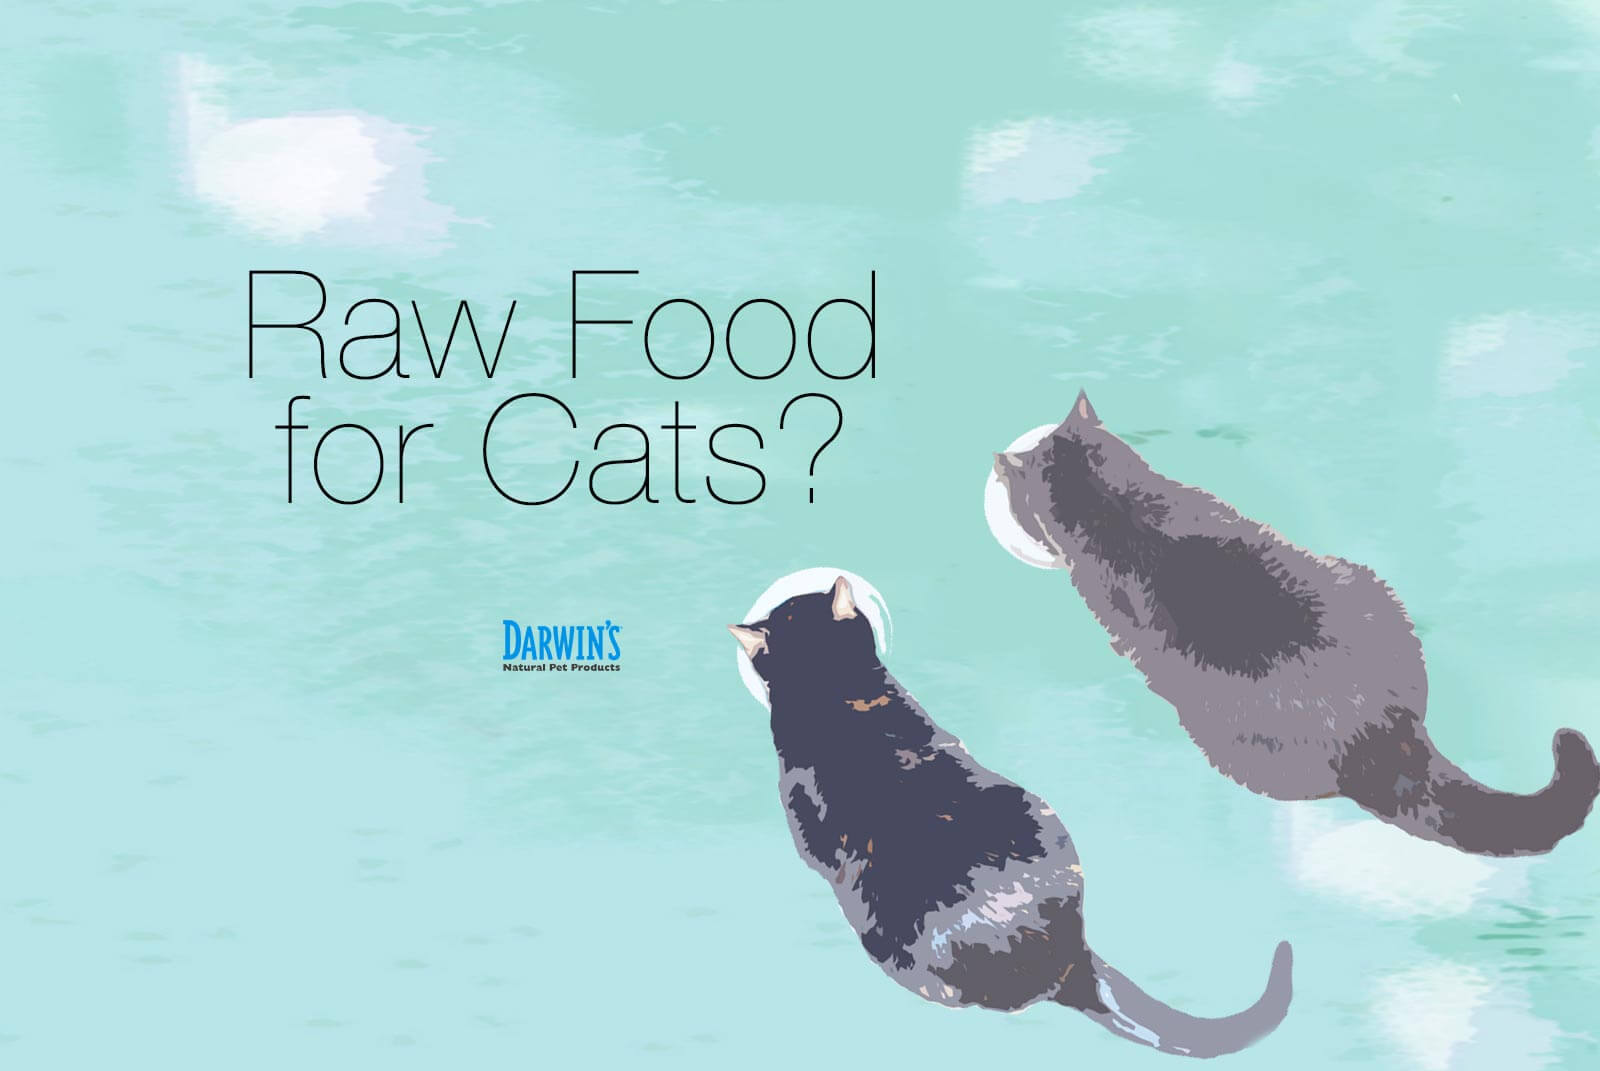 Raw Food for Cats?